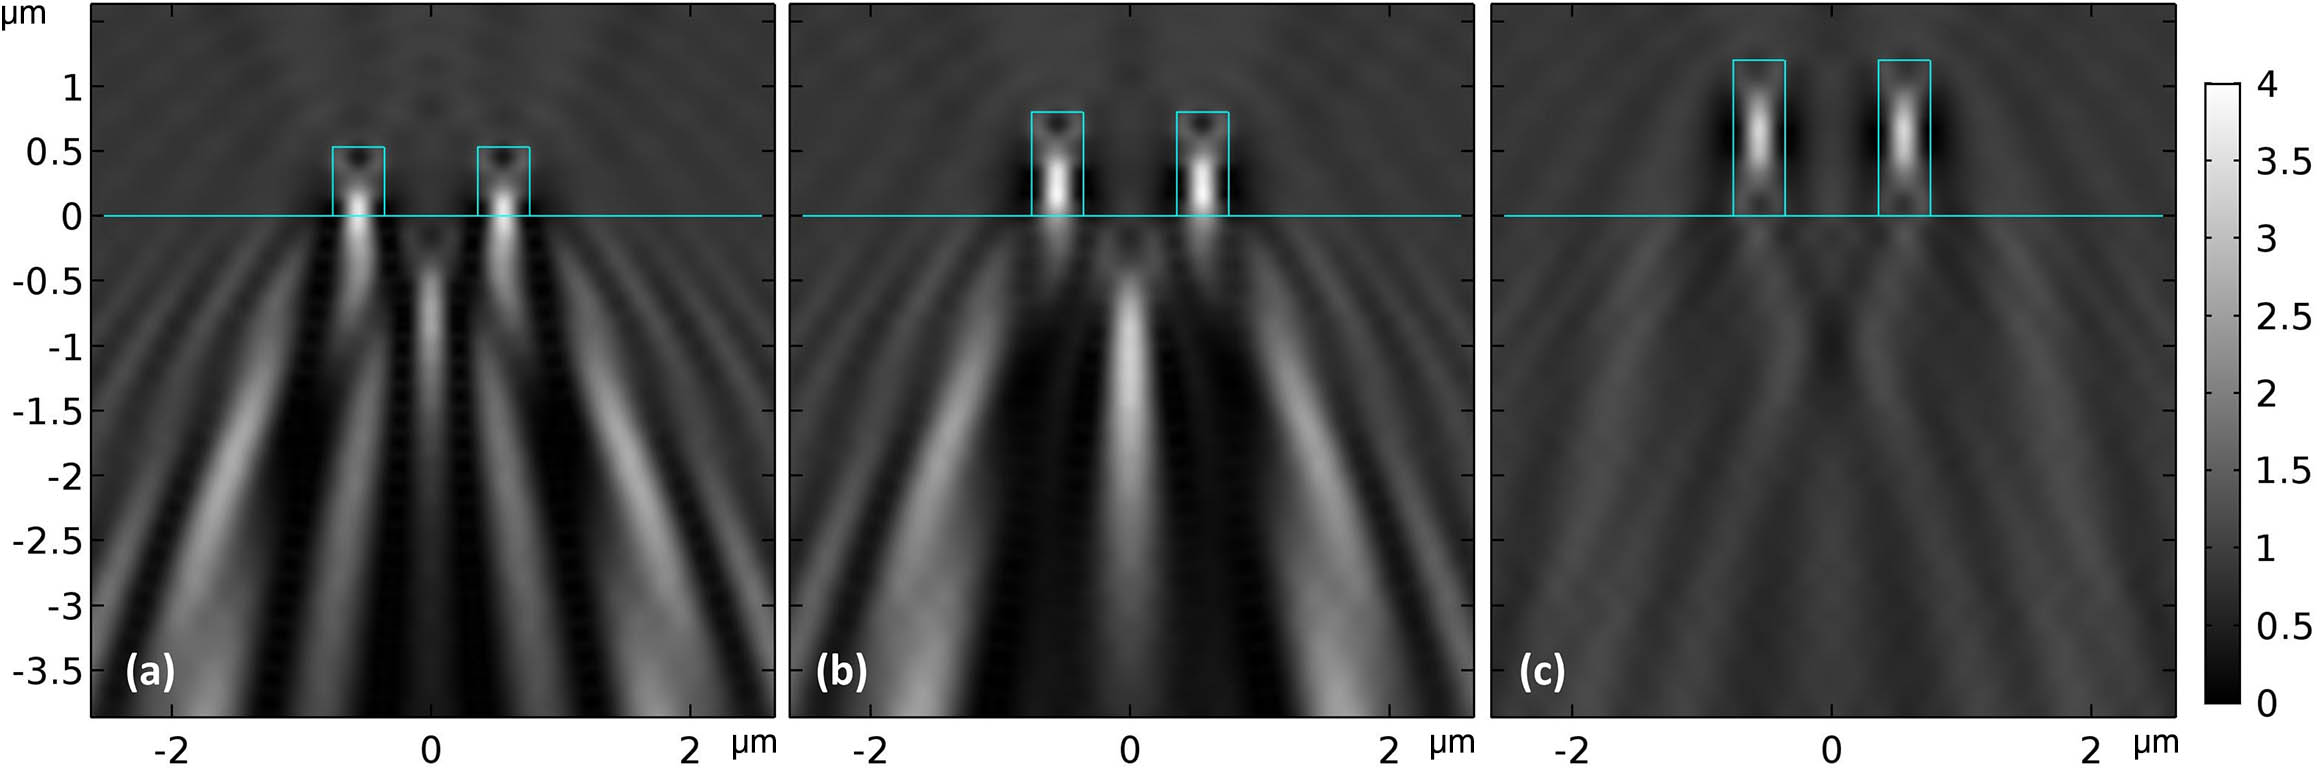 Diffraction intensity patterns obtained for pairs of dielectric rectangles with different heights H=0.53, 0.80, 1.20 μm from left to right and width W=0.4 μm.